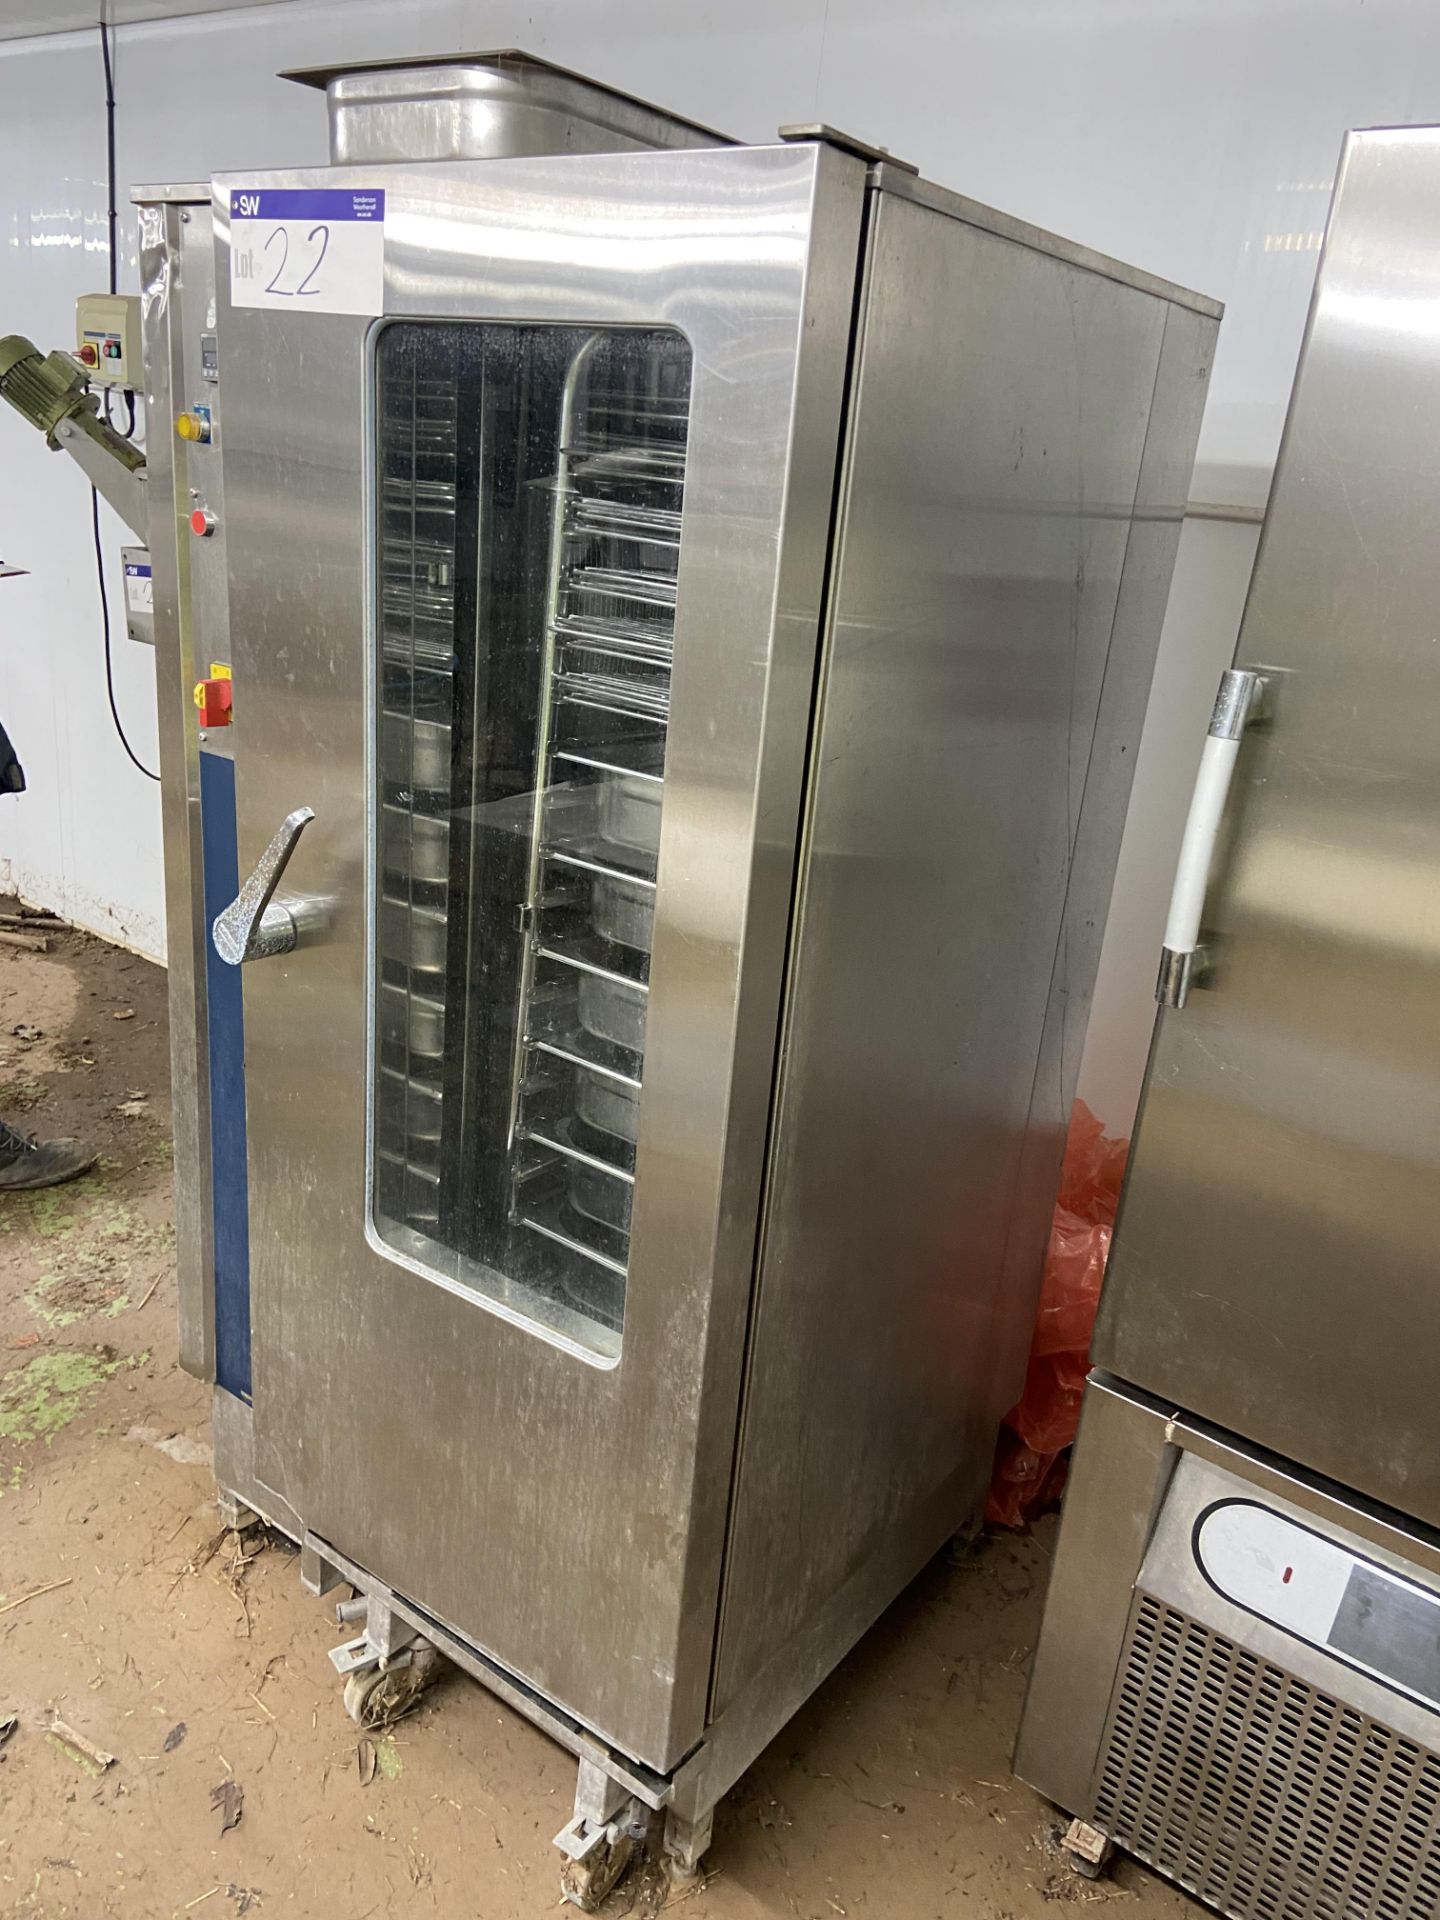 Rational CD201 CLOTTED CREAM HEATER/ OVEN, with multi-tray mobile rack, serial no. 20192031103, with - Bild 4 aus 7